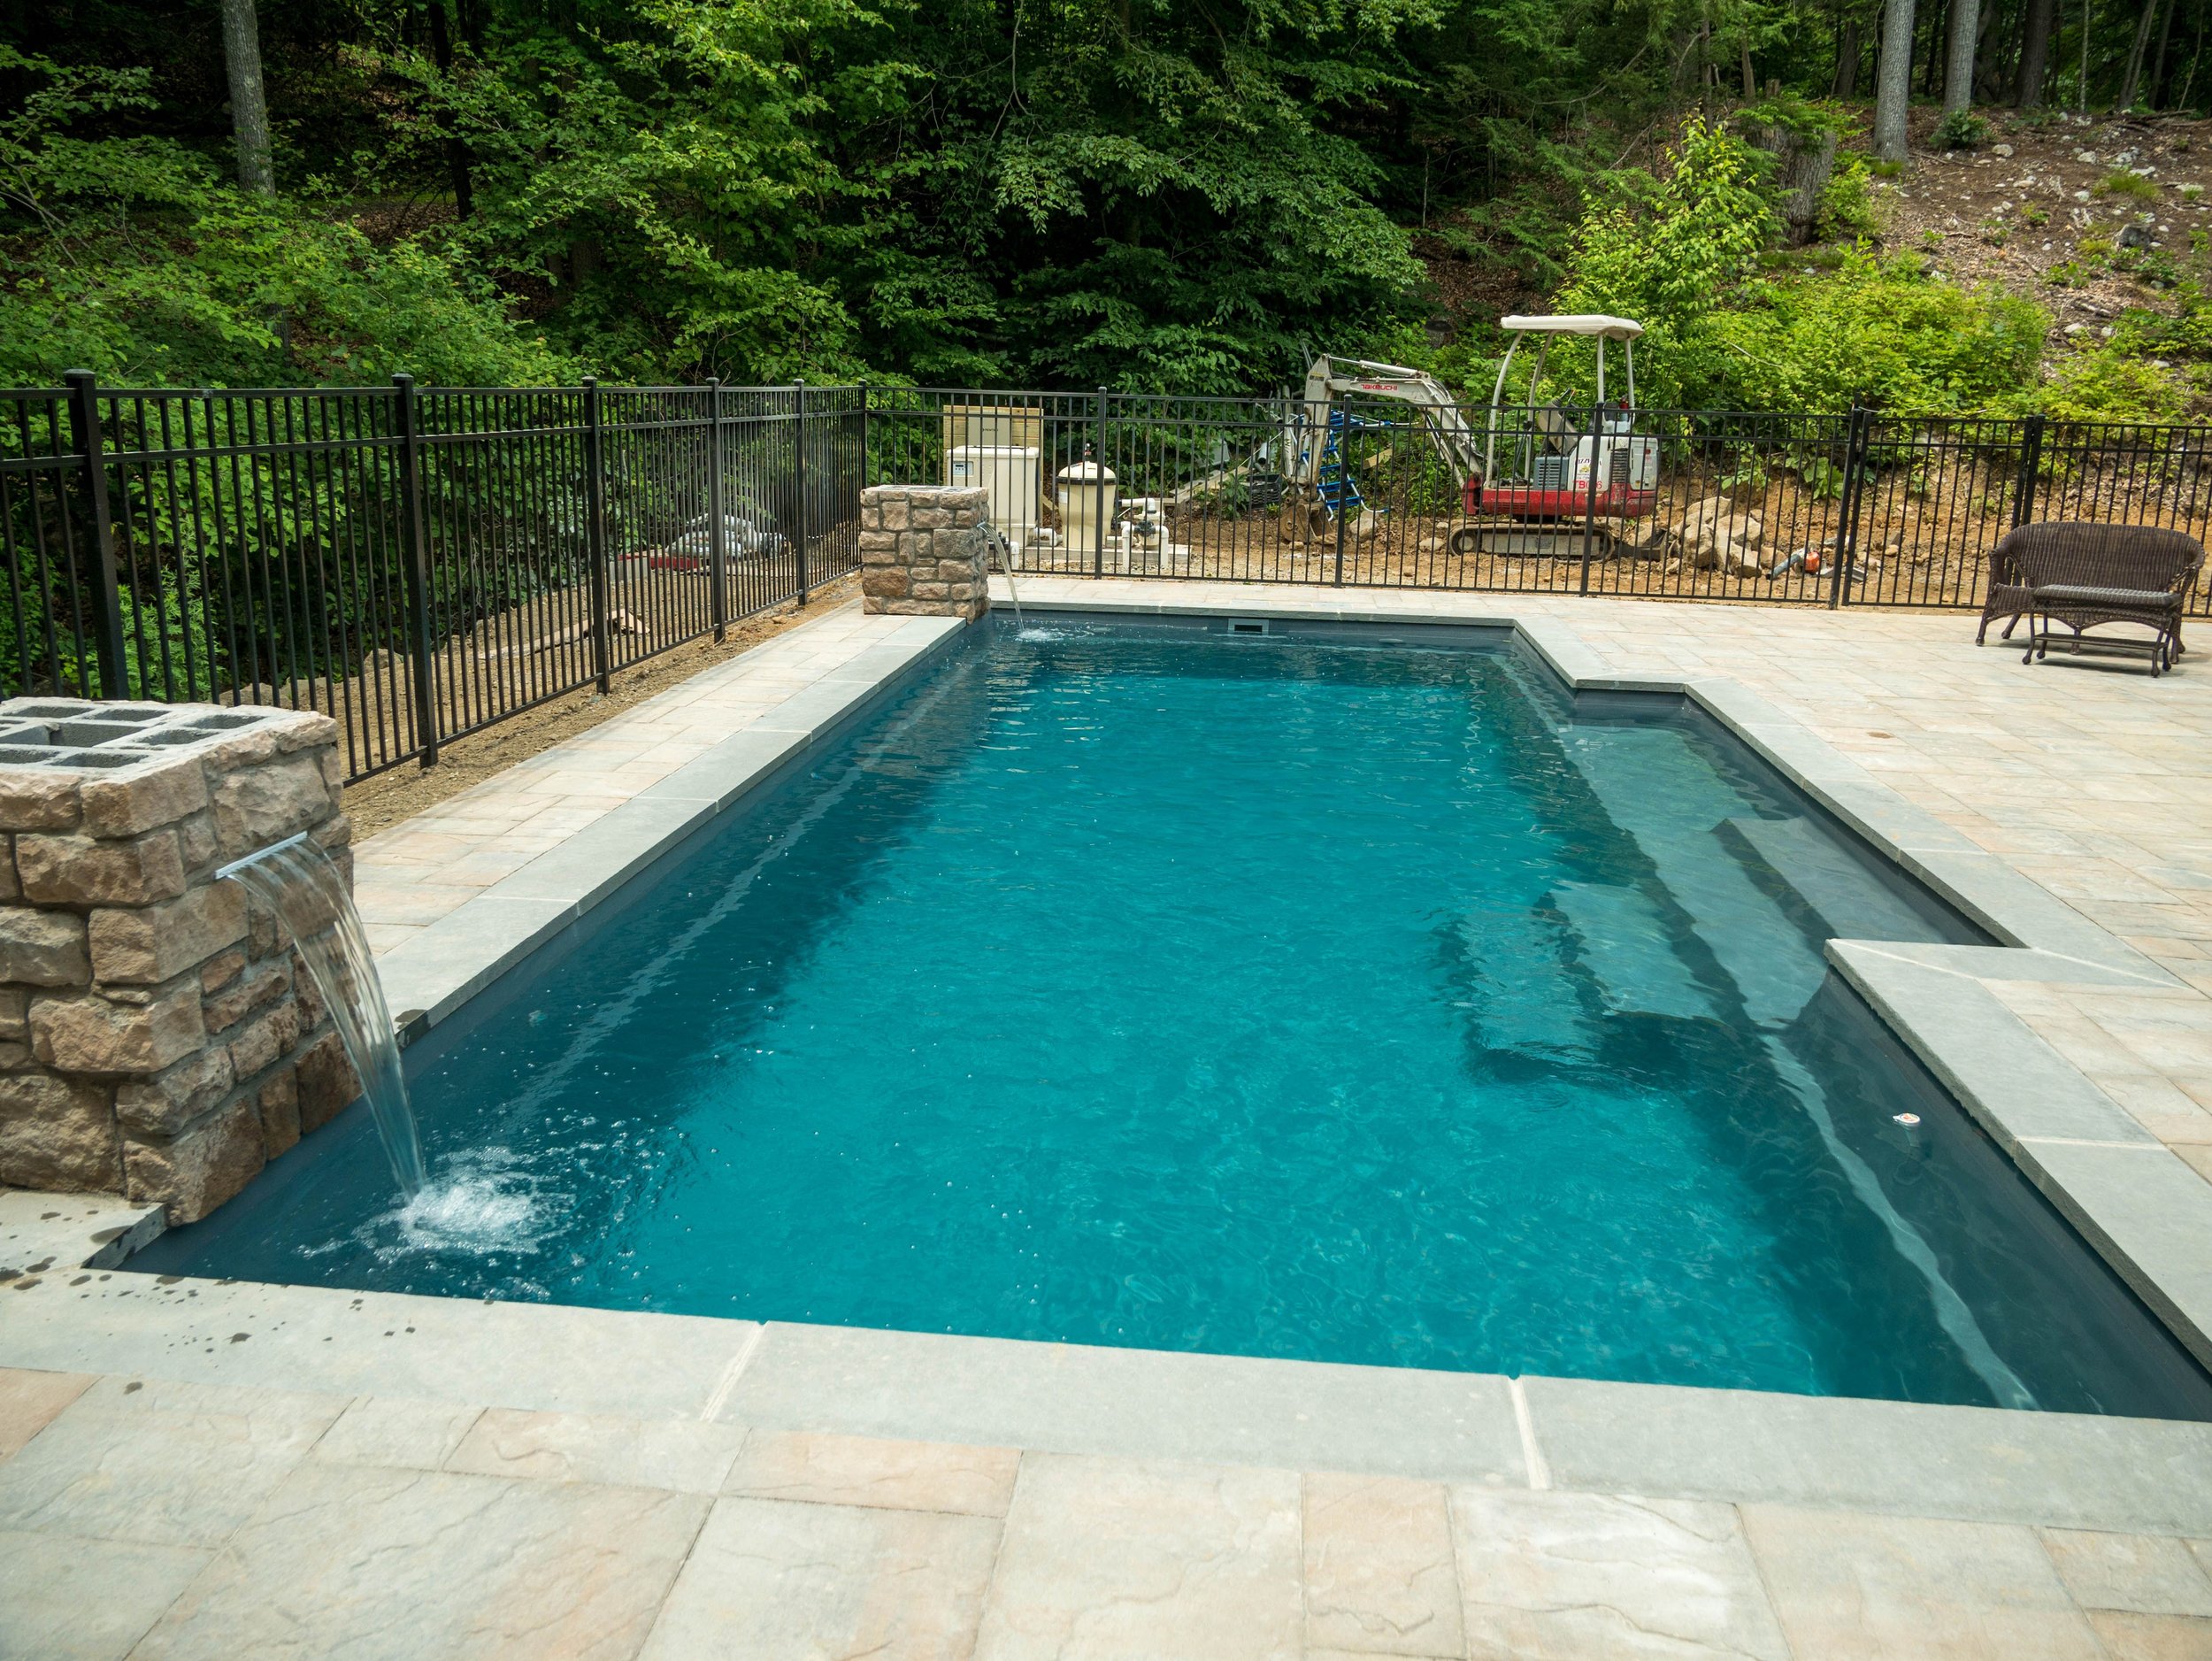 Pool Companies Near Me Recommend These 3 Pool Designs In Ulster County%2C NY